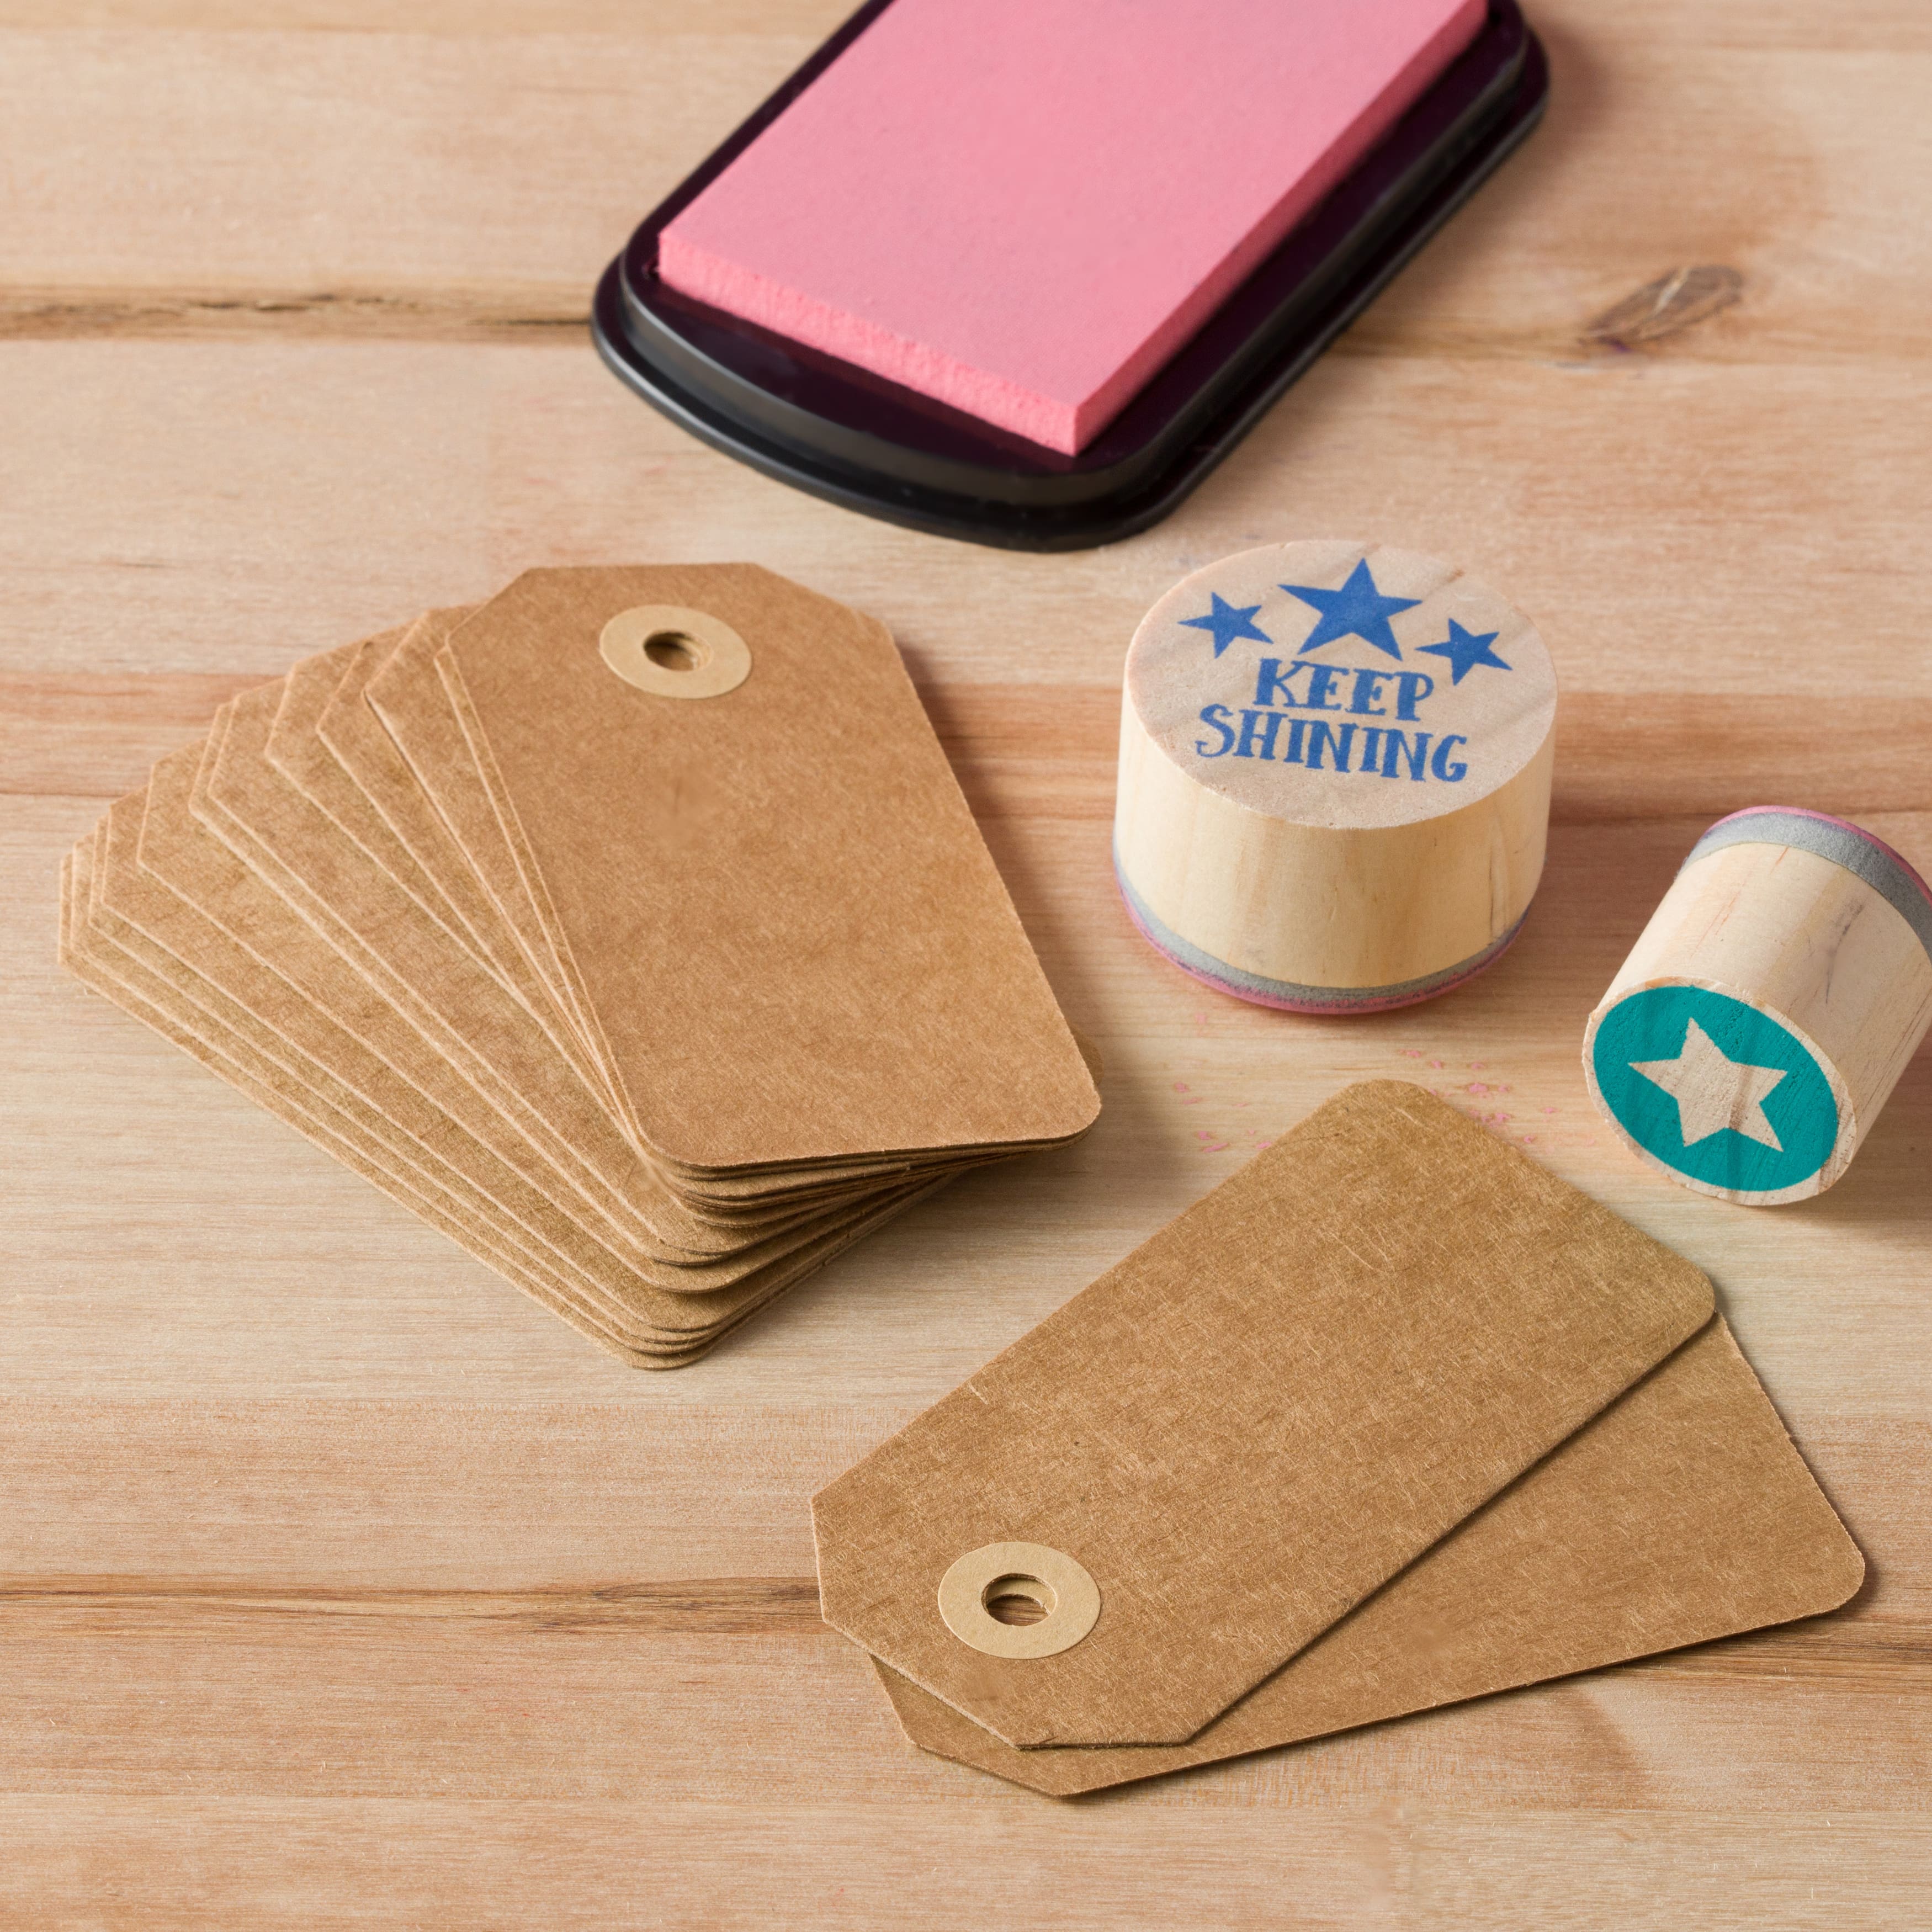 Kraft Creative Tags By Recollections&#xAE;, 25 Pack